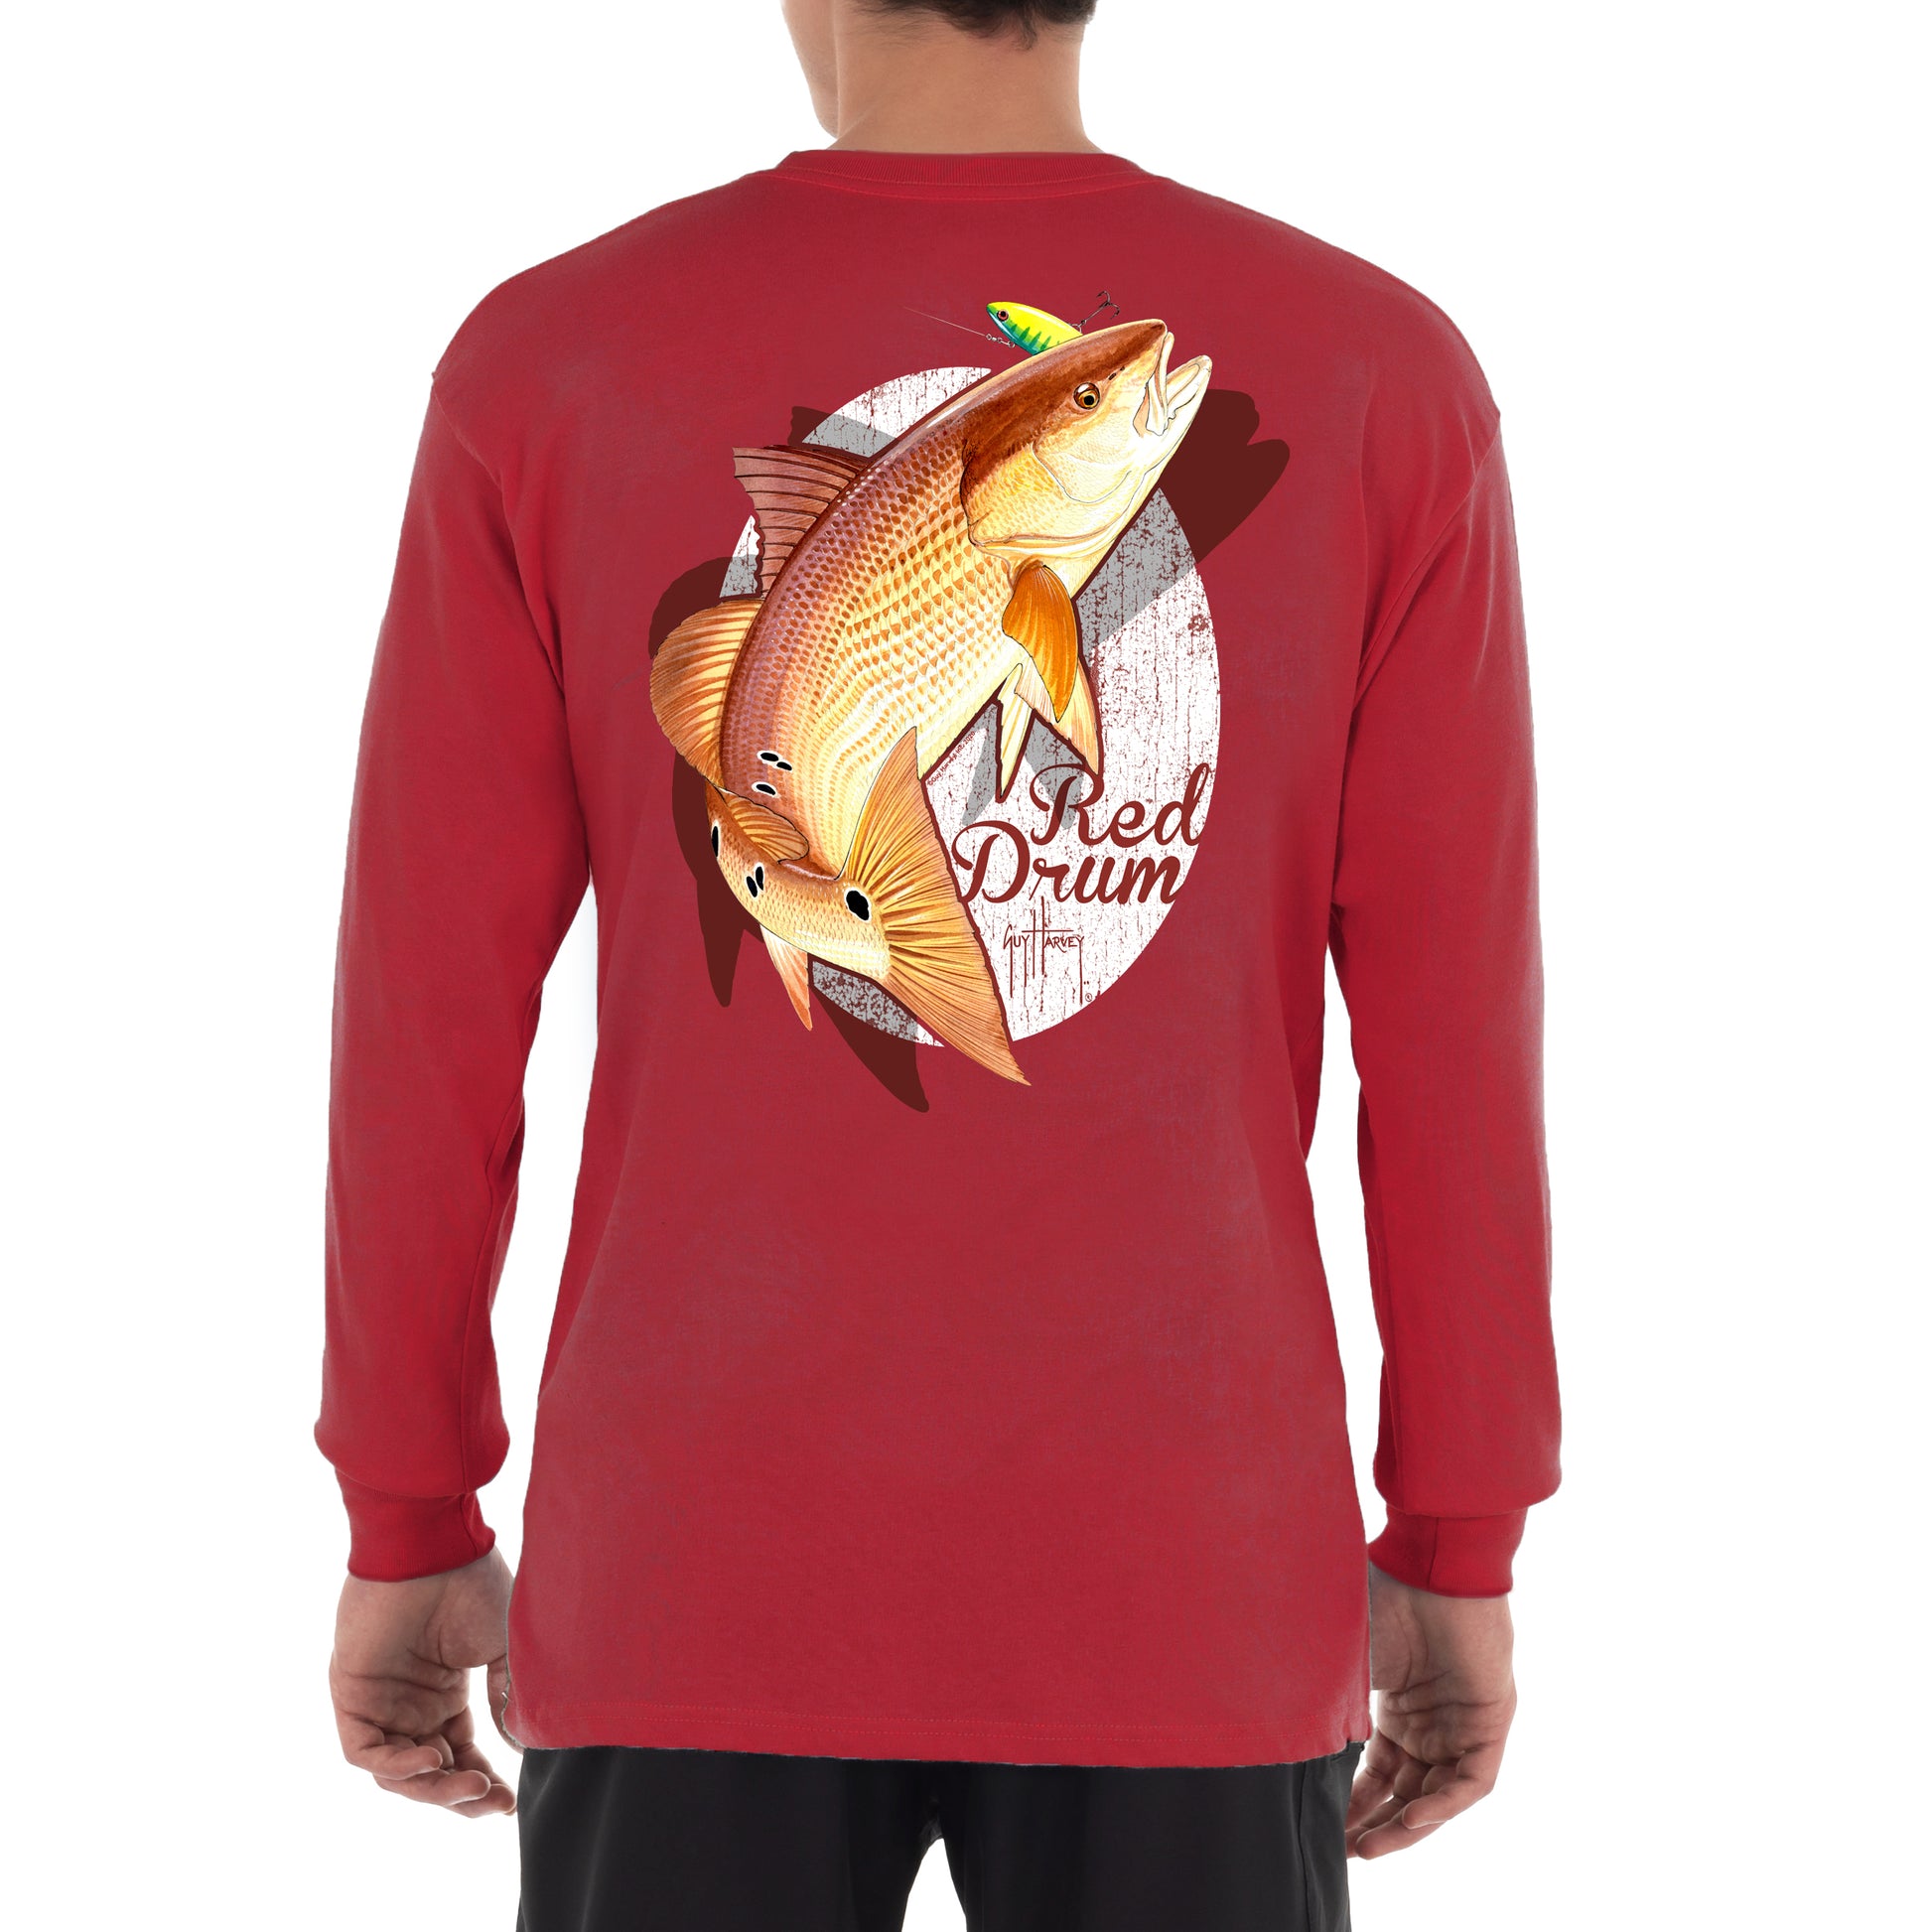 Men's Red Drum Long Sleeve Red T Shirt View 1